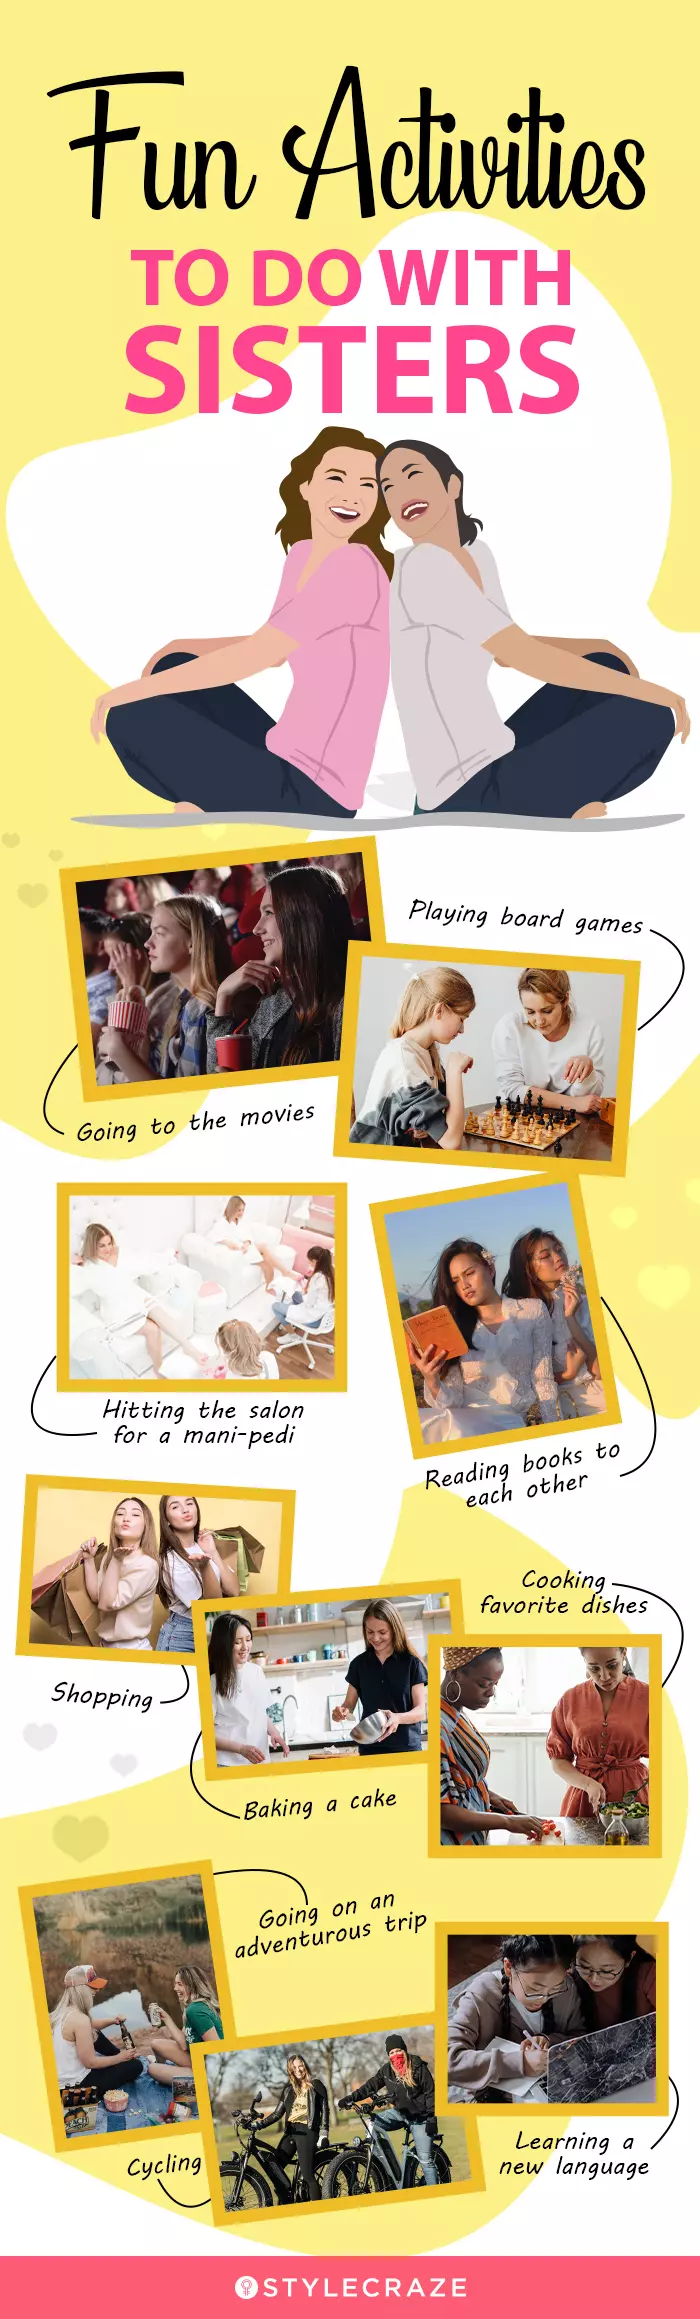 fun activities to do with sisters (infographic)